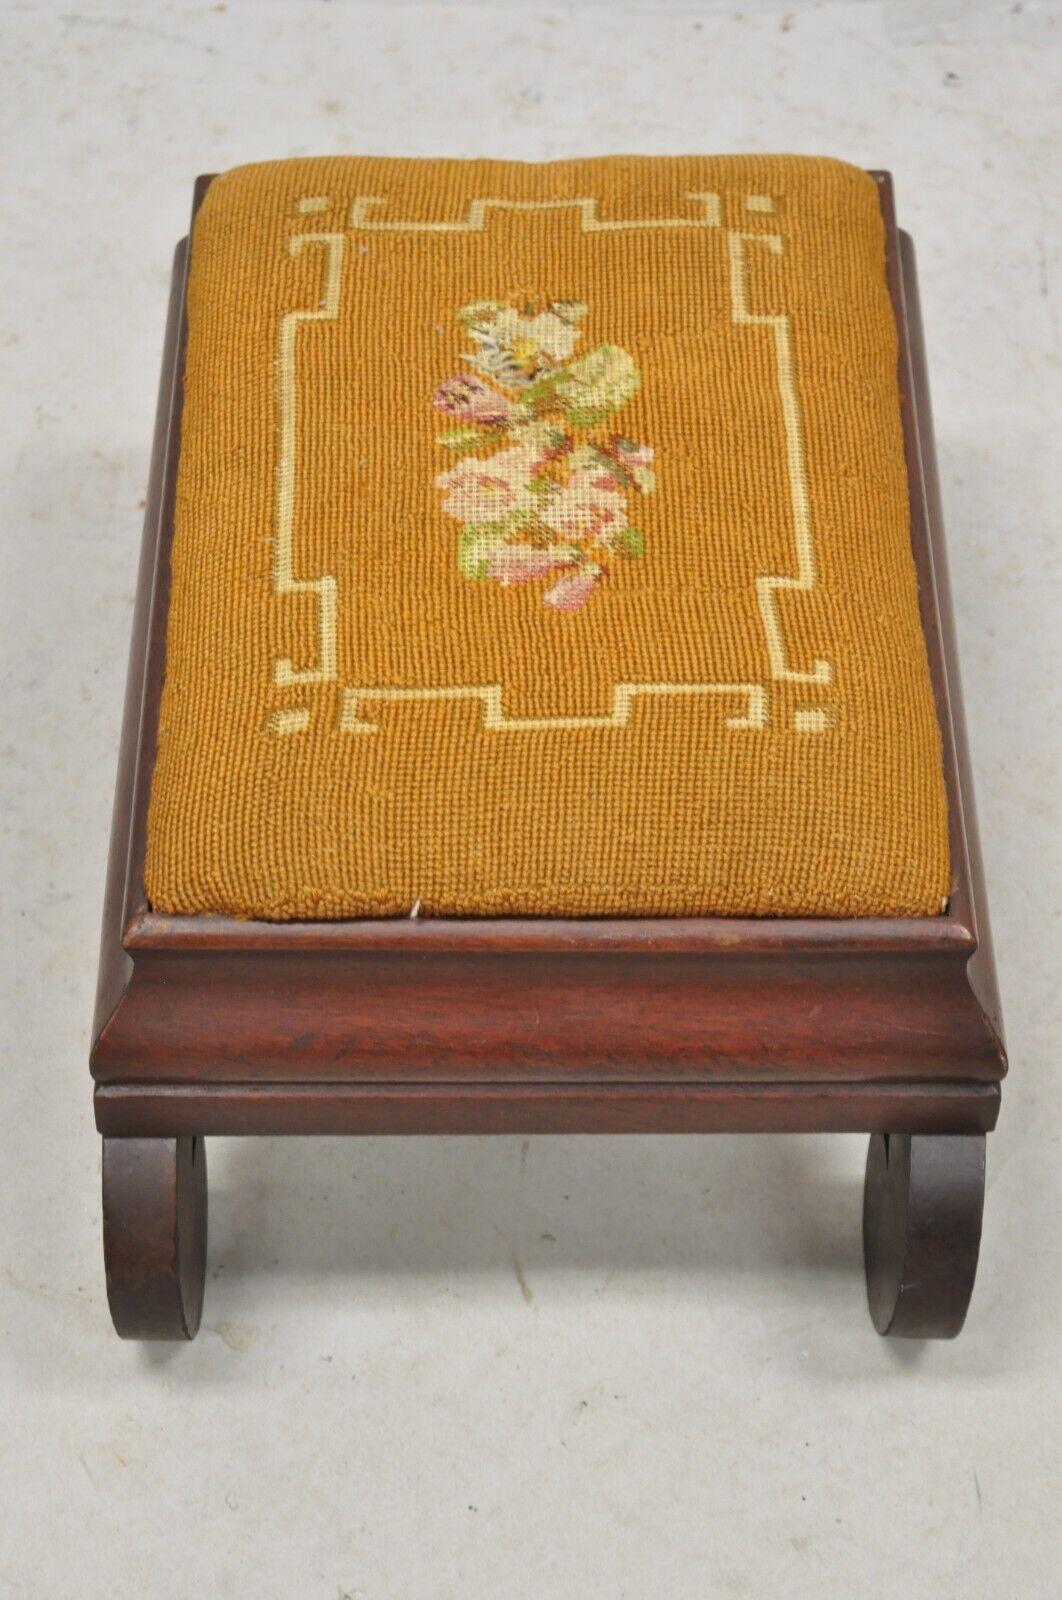 Antique American Empire Mahogany Brown Floral Needlepoint Footstool Ottoman 5